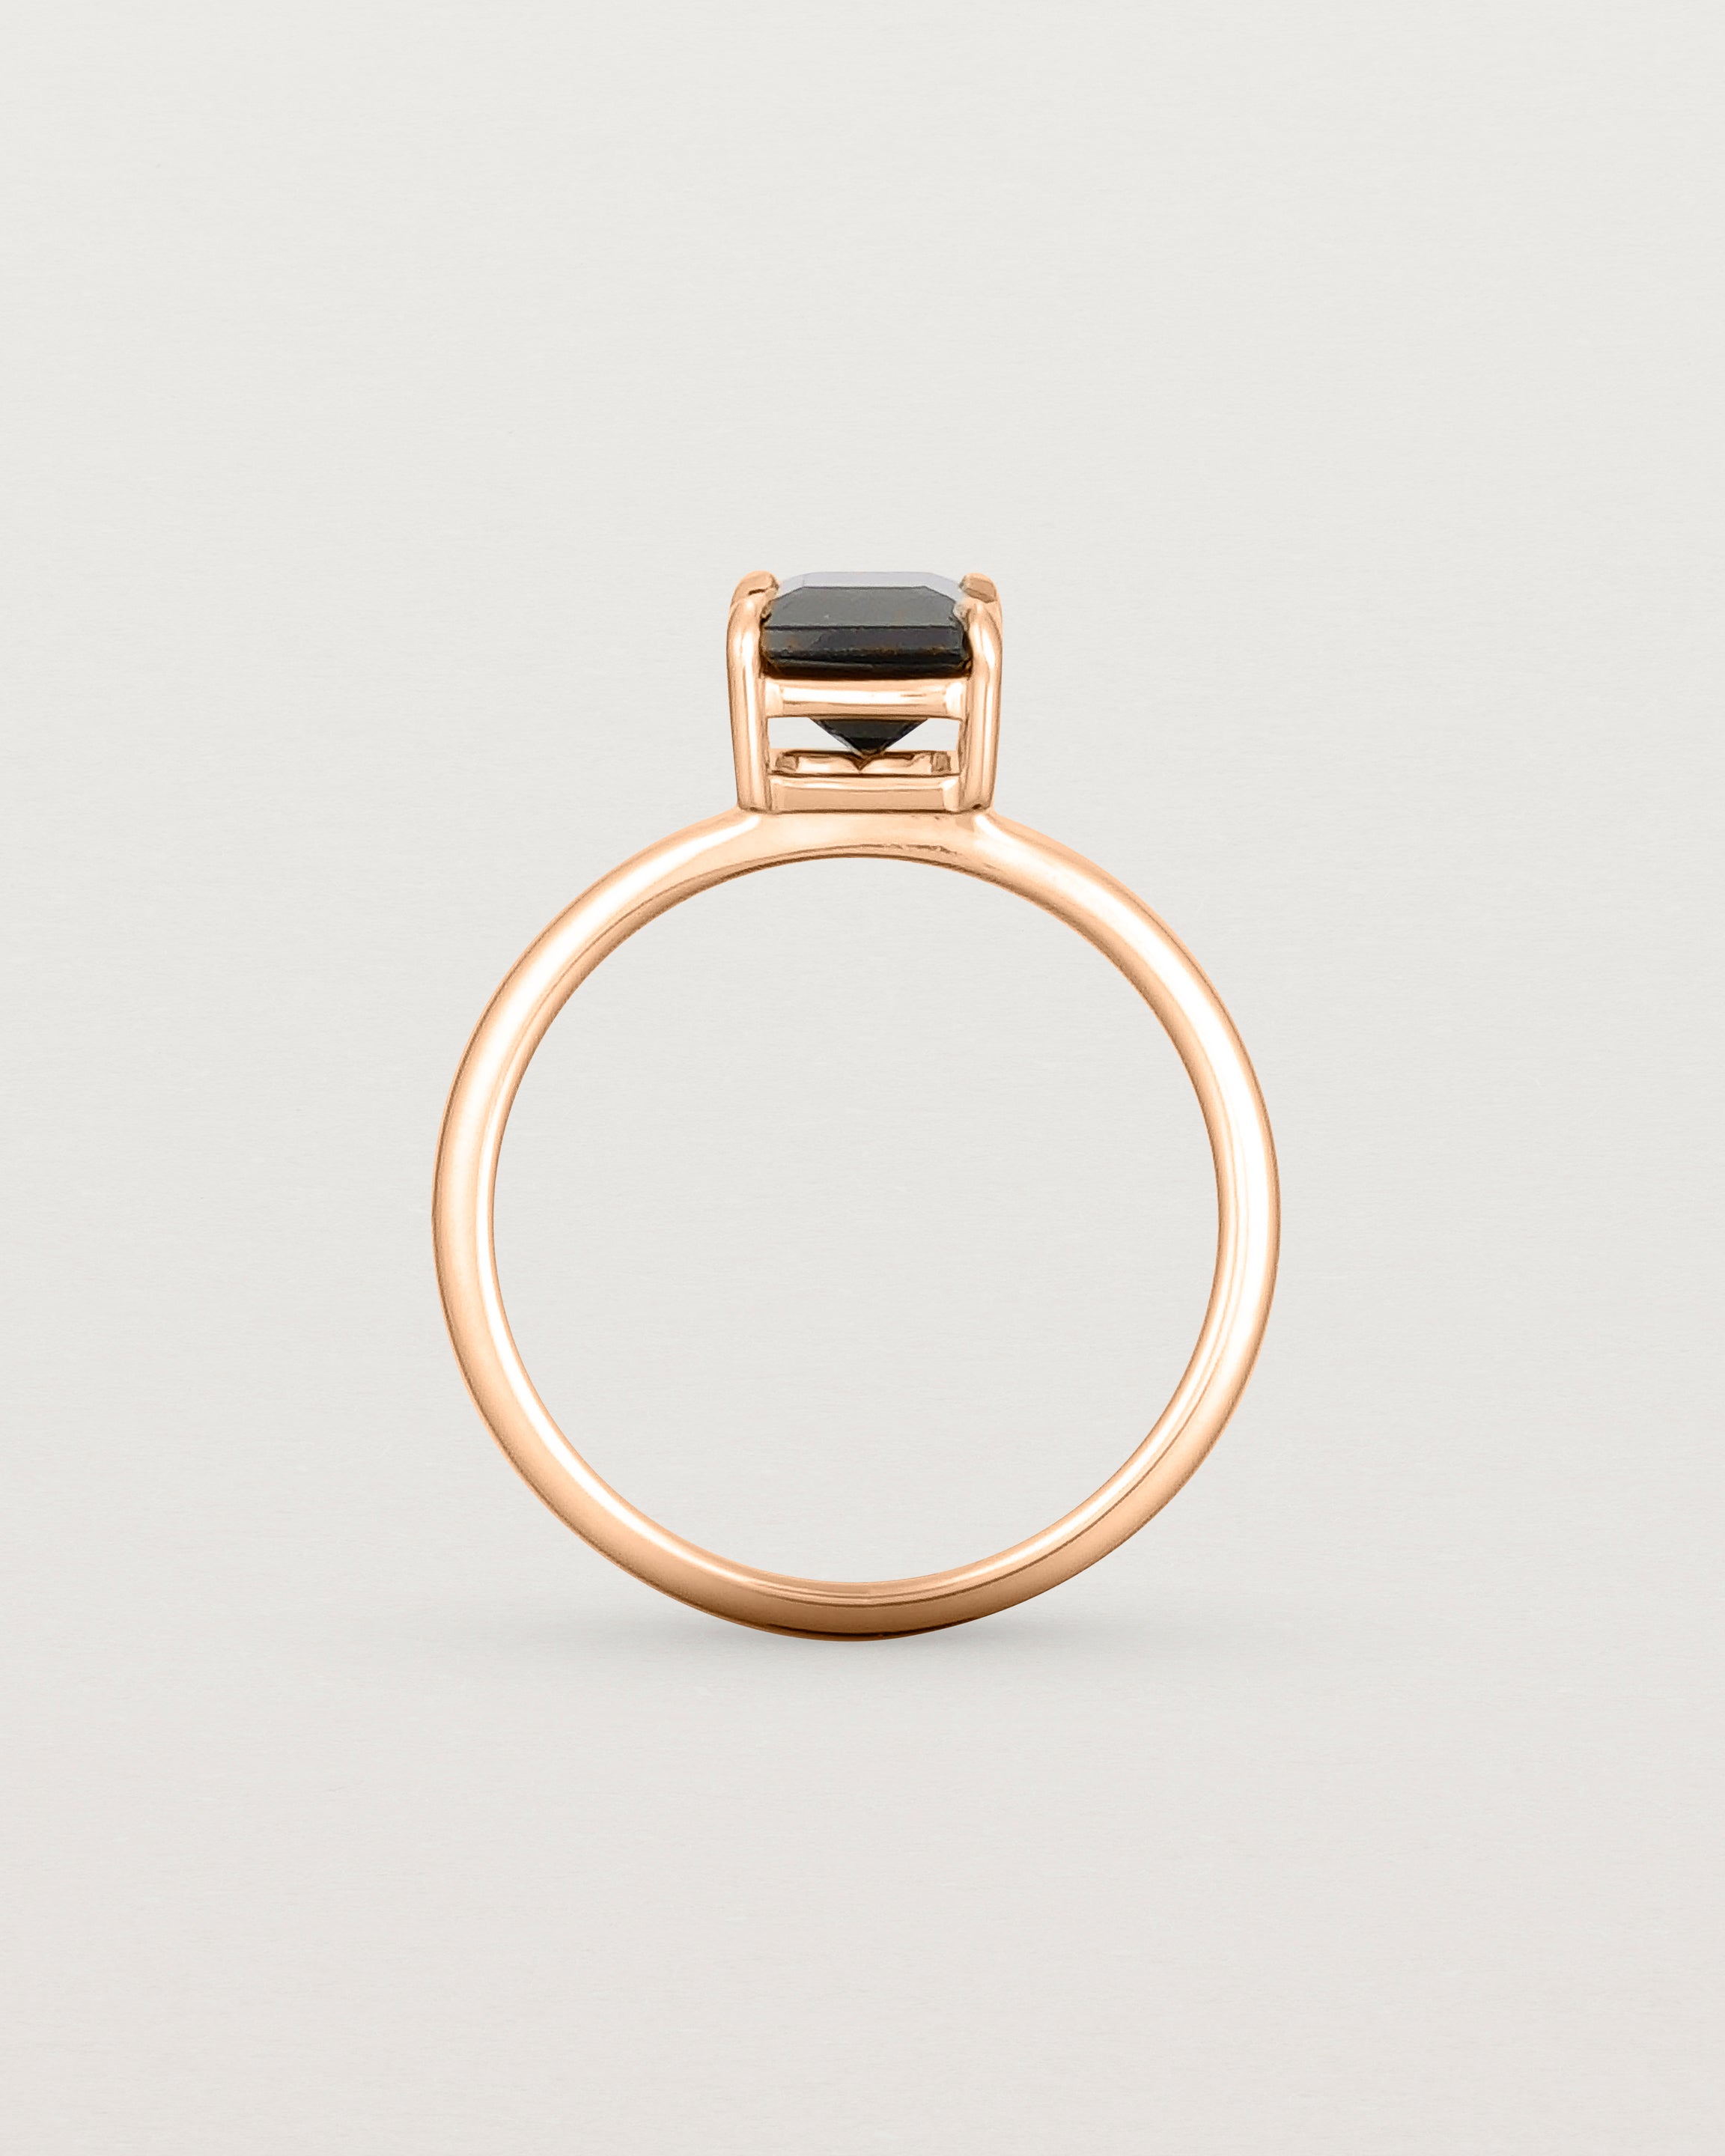 Standing view of the Una Emerald Solitaire | Black Spinel | Rose Gold.